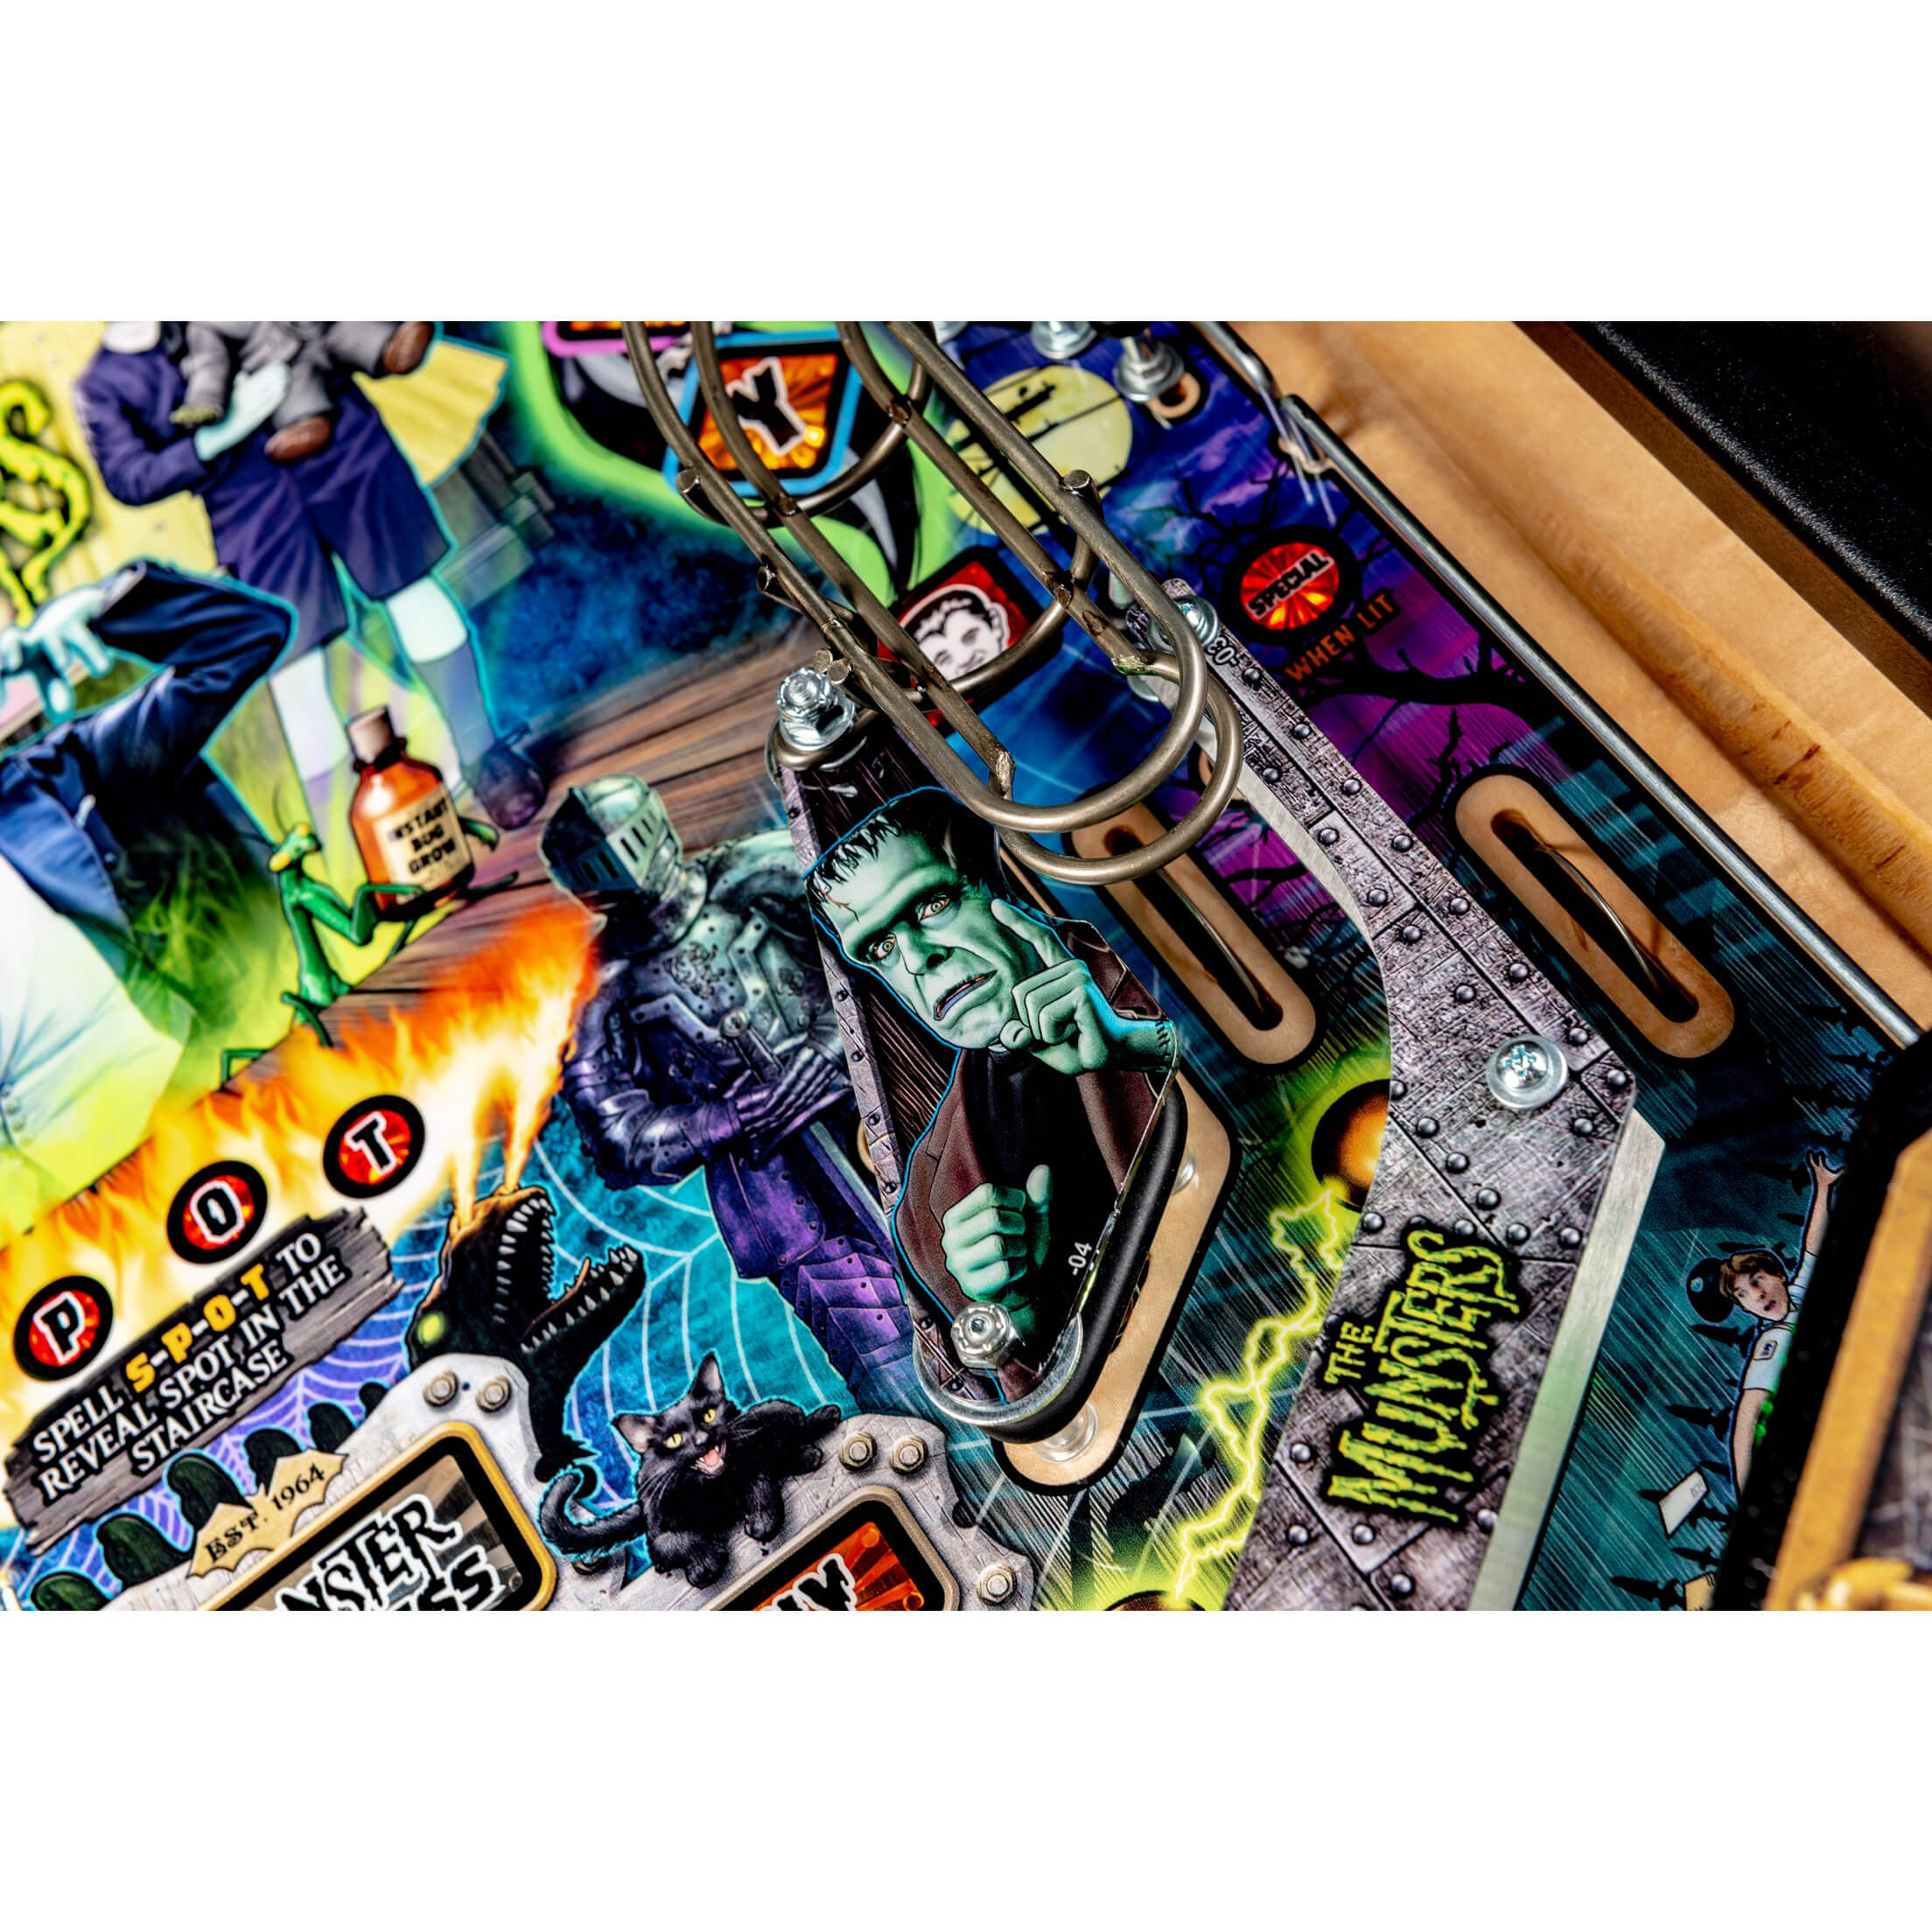 Stern Pinball The Munsters Pro Backbox Aufkleber Decal Right #820-78L1-02 